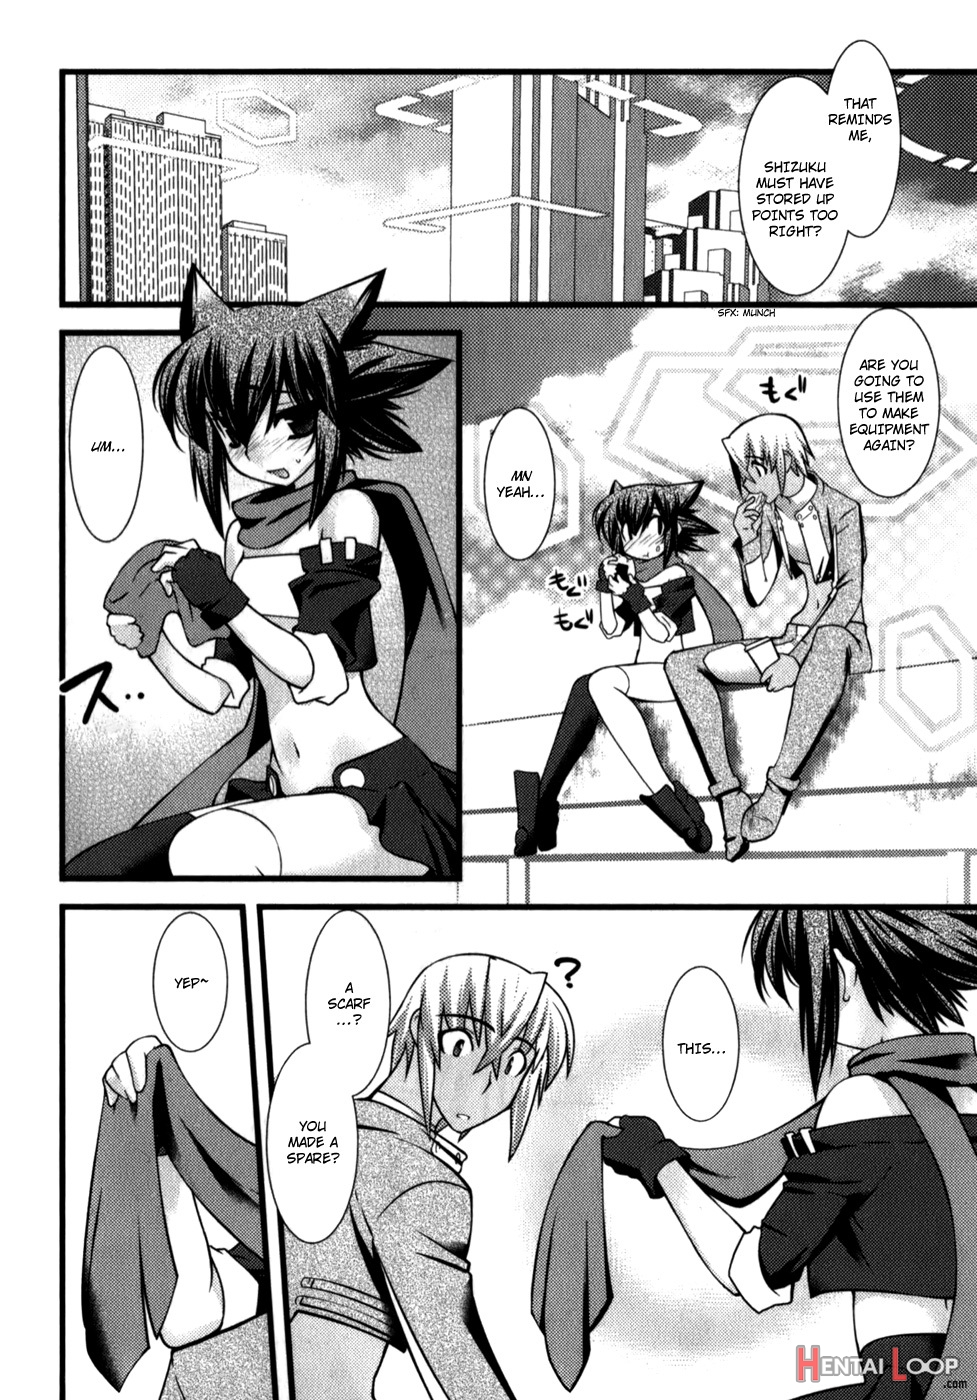 Trans Trans Ch. 3 page 6